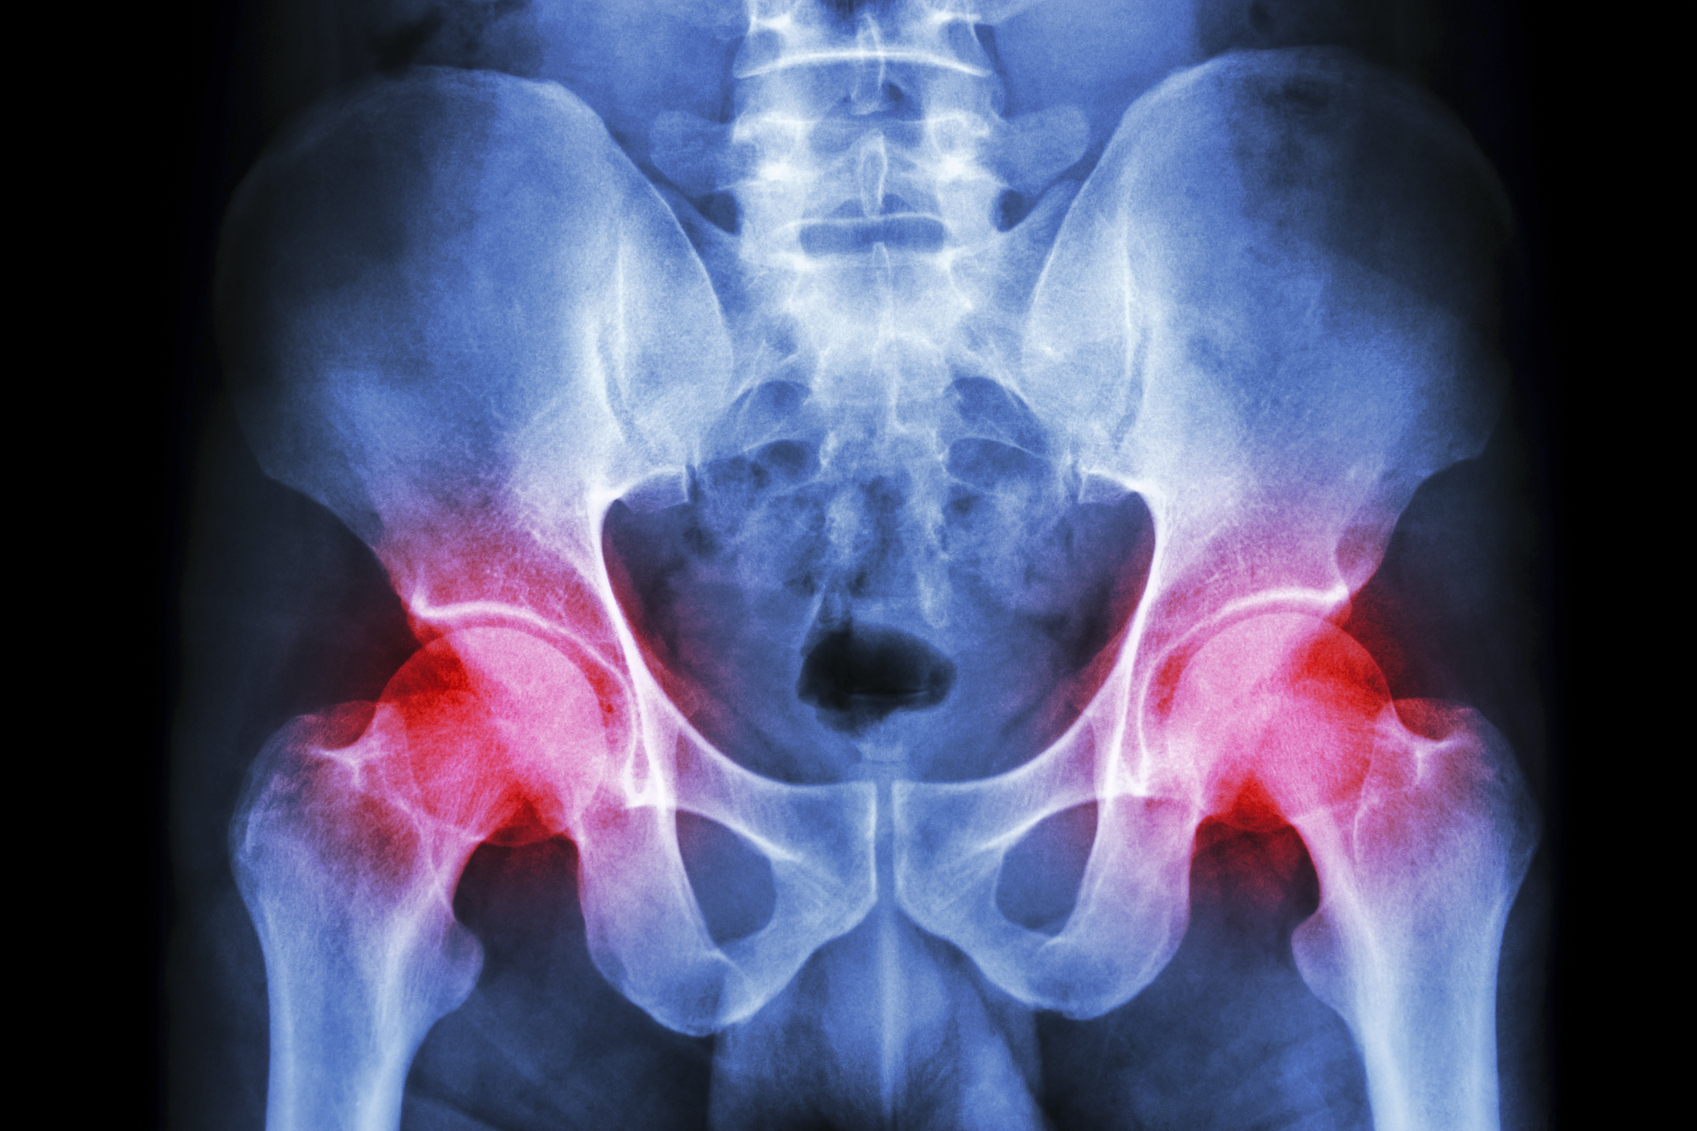 Mini-incision hip replacement surgery: Is it right for you?